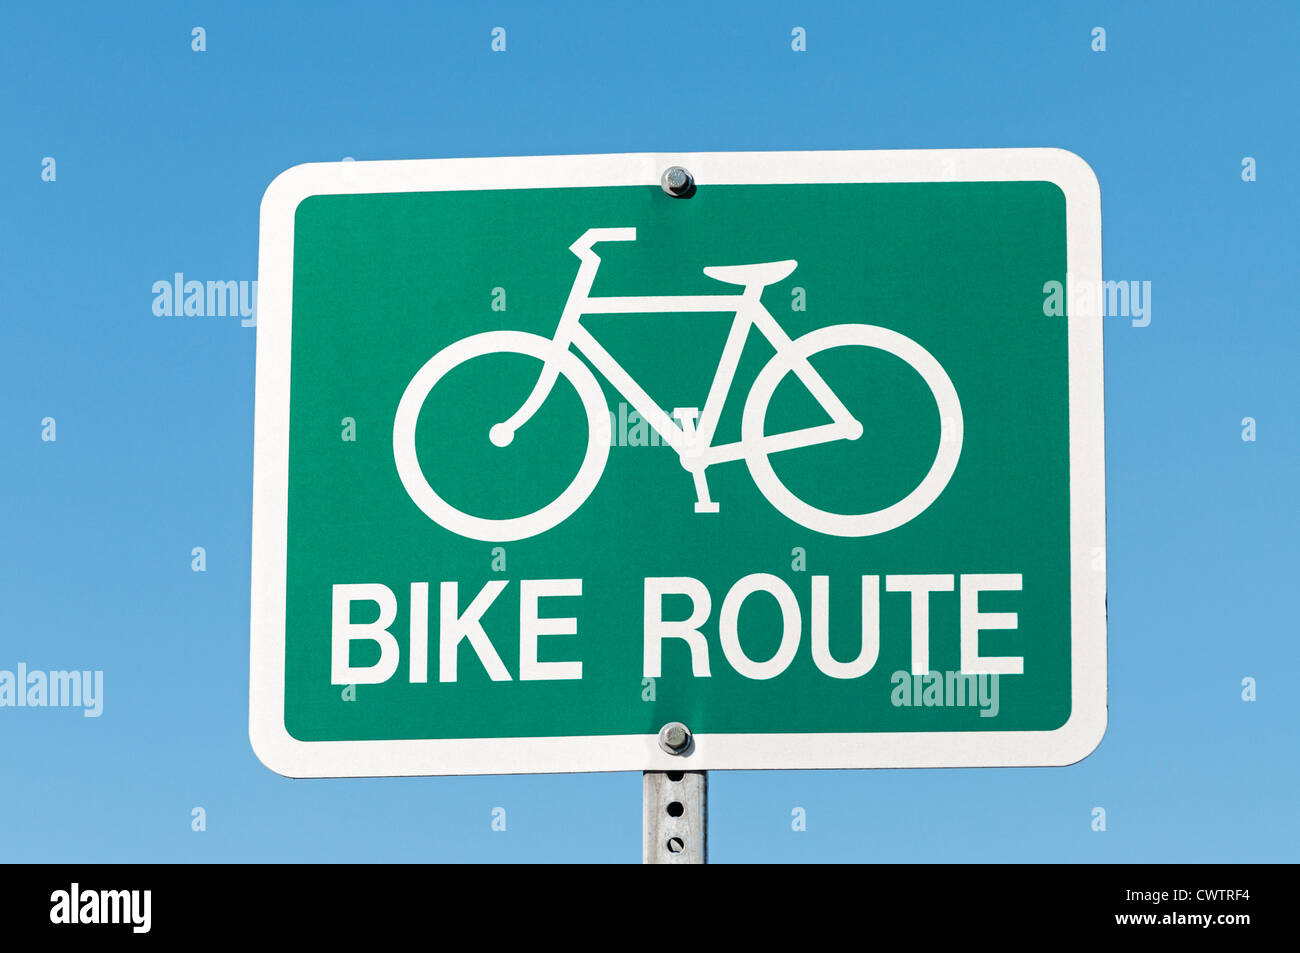 Bike route sign Stock Photo